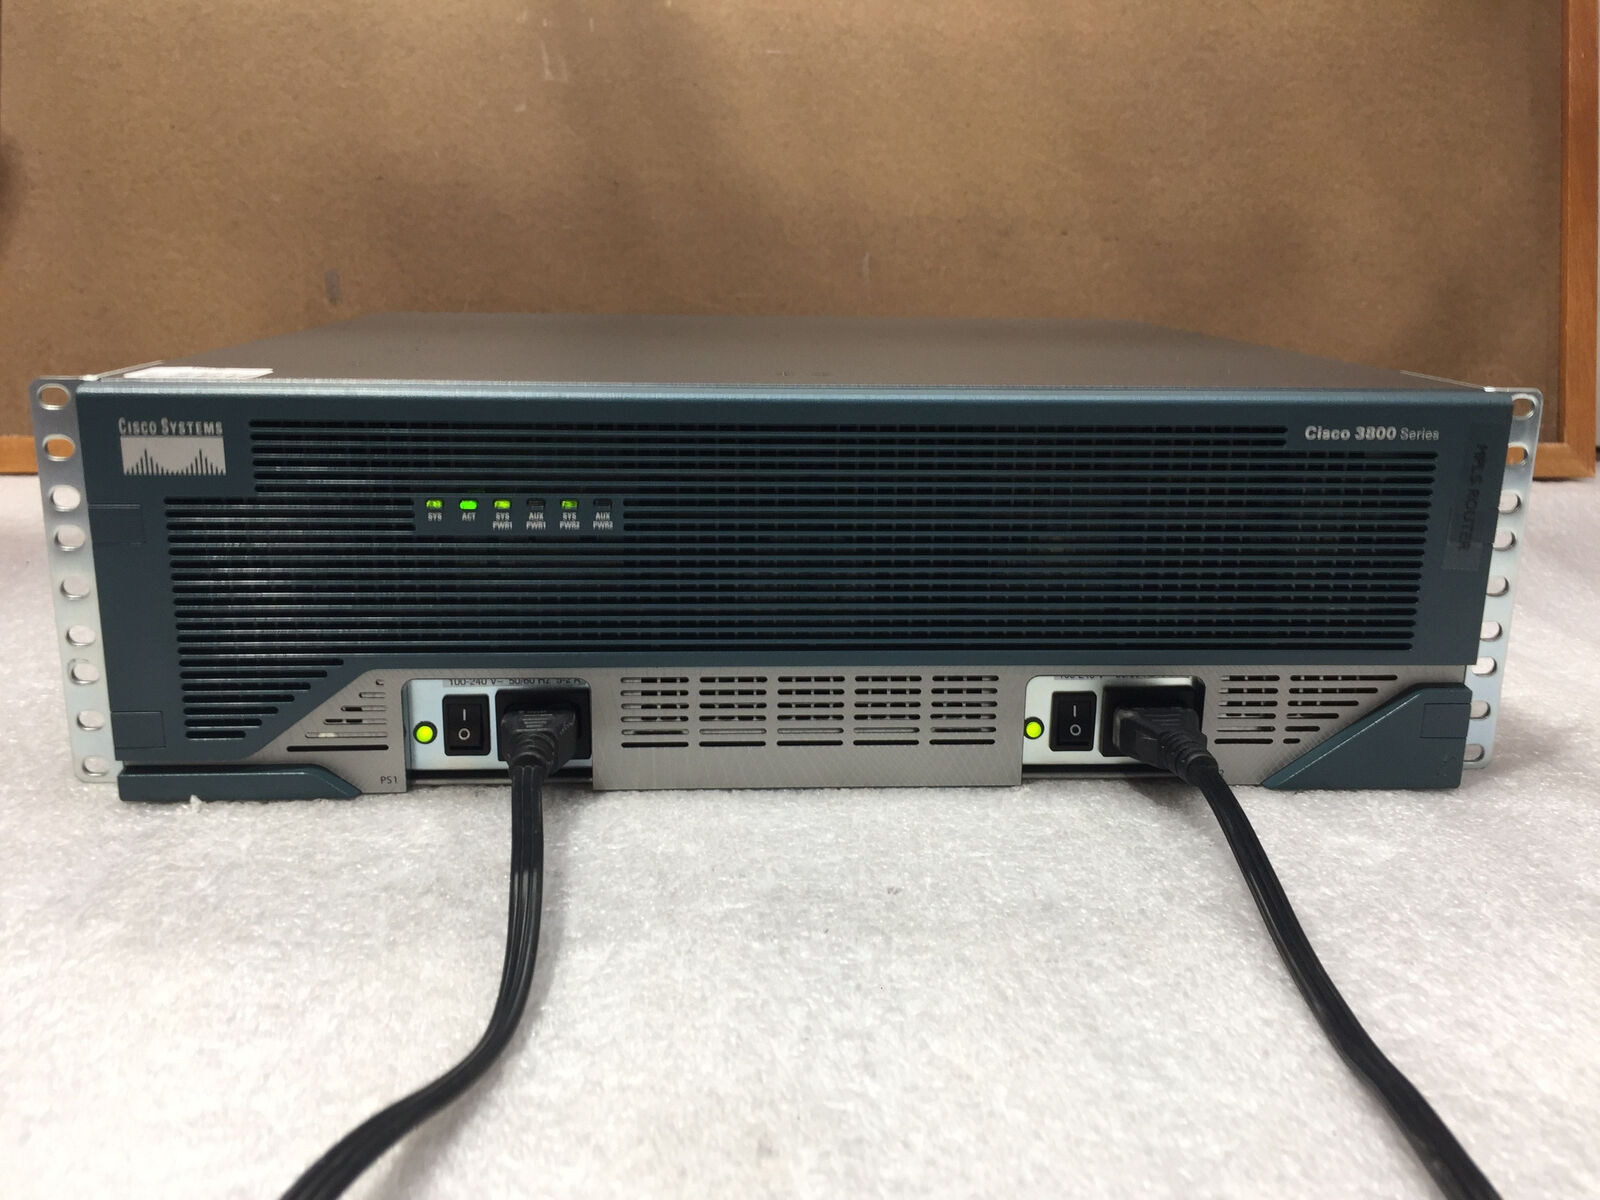 Cisco 3800 Series Model 3845 V01 Integrated Services Router -- TESTED AND RESET